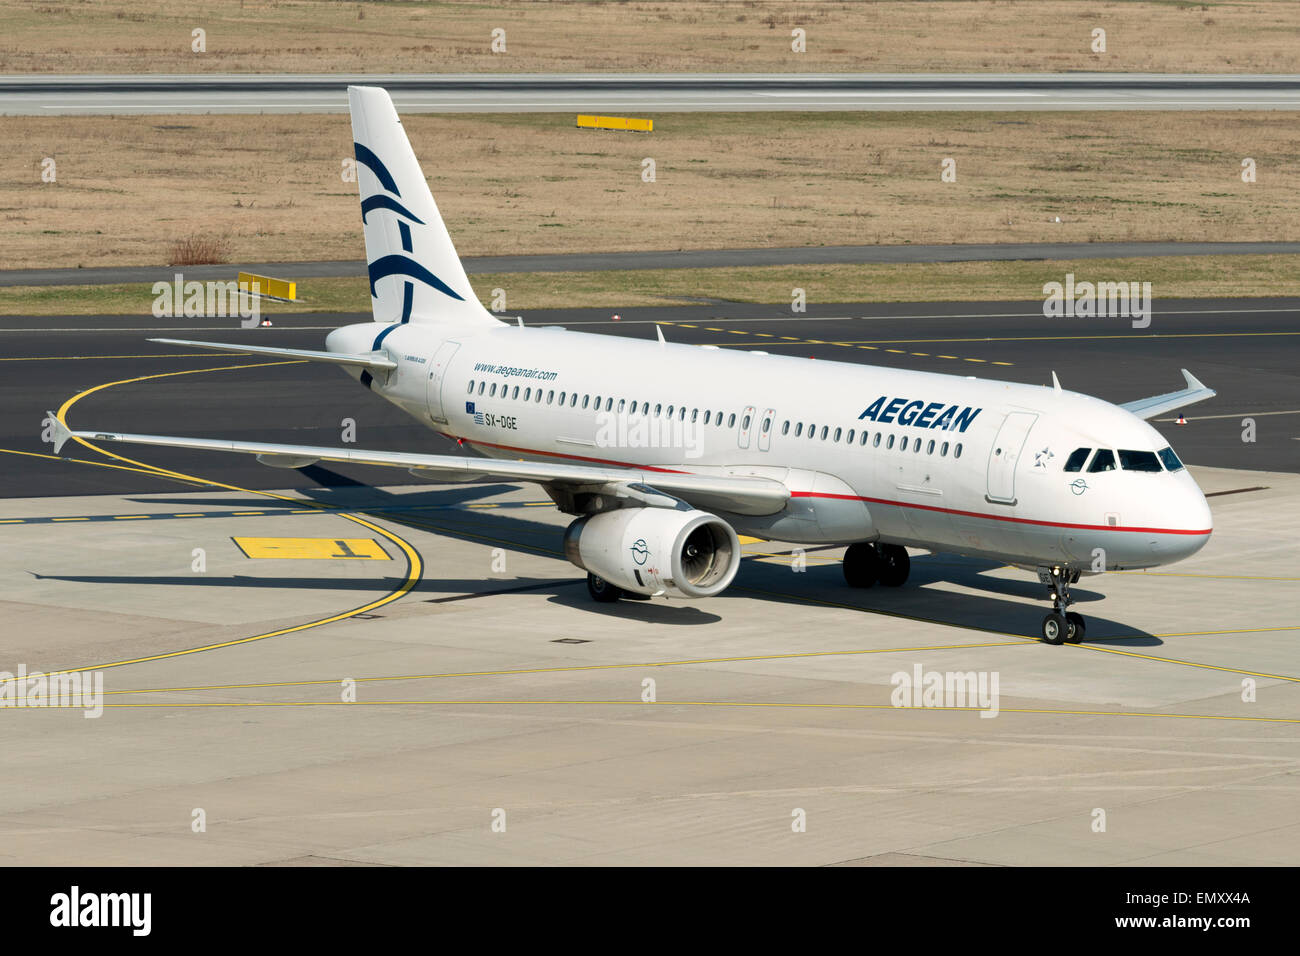 Aegean Airlines Airbus A320, Dusseldorf International Airport Germany Stock Photo